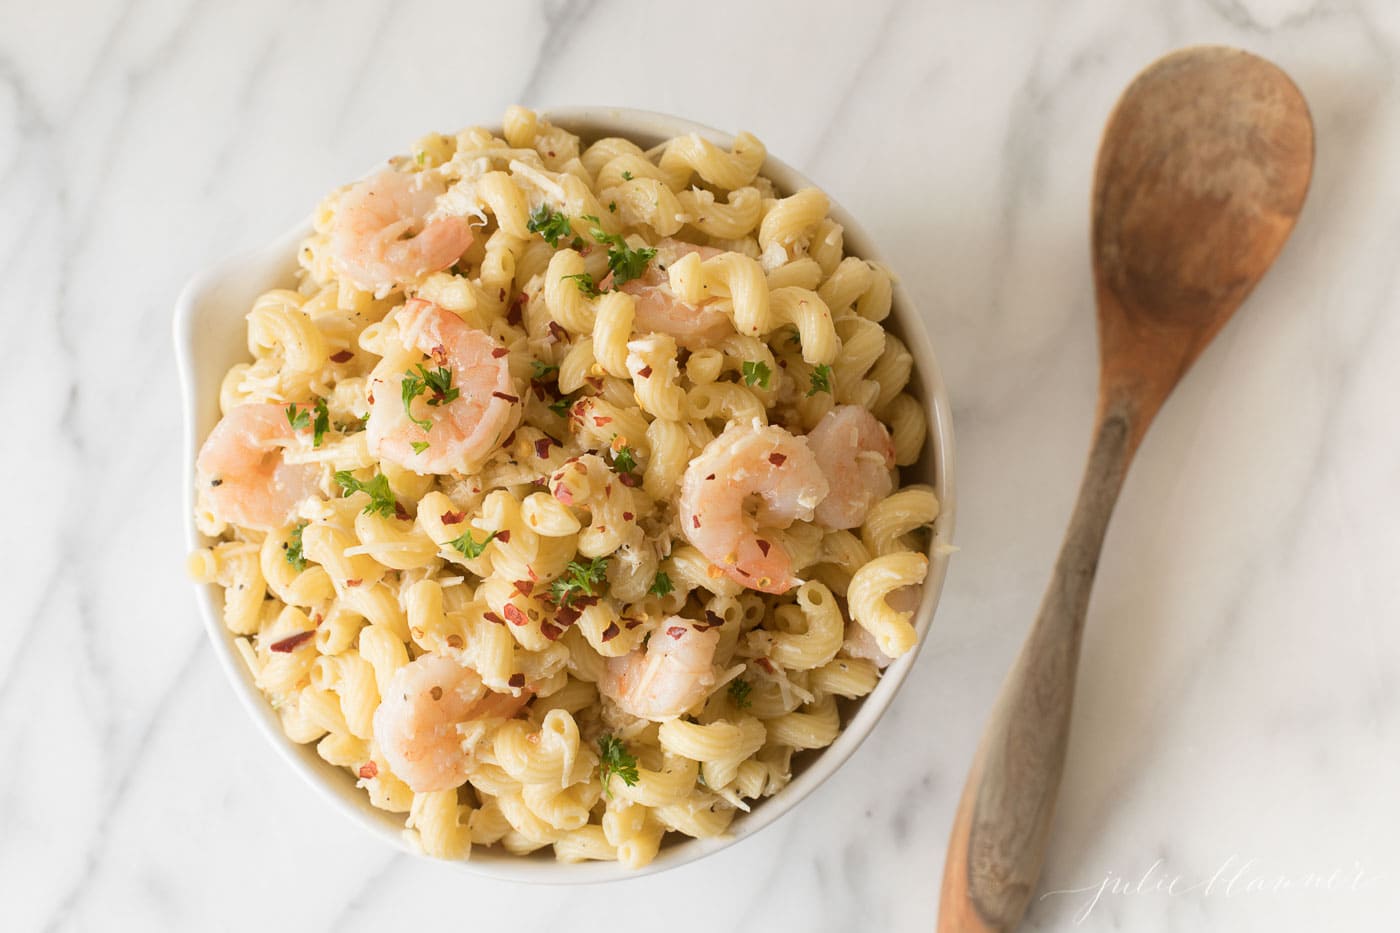 Shrimp Corkscrew pasta sals in a white bowl, a wooden spoon to the side on a marble surface.